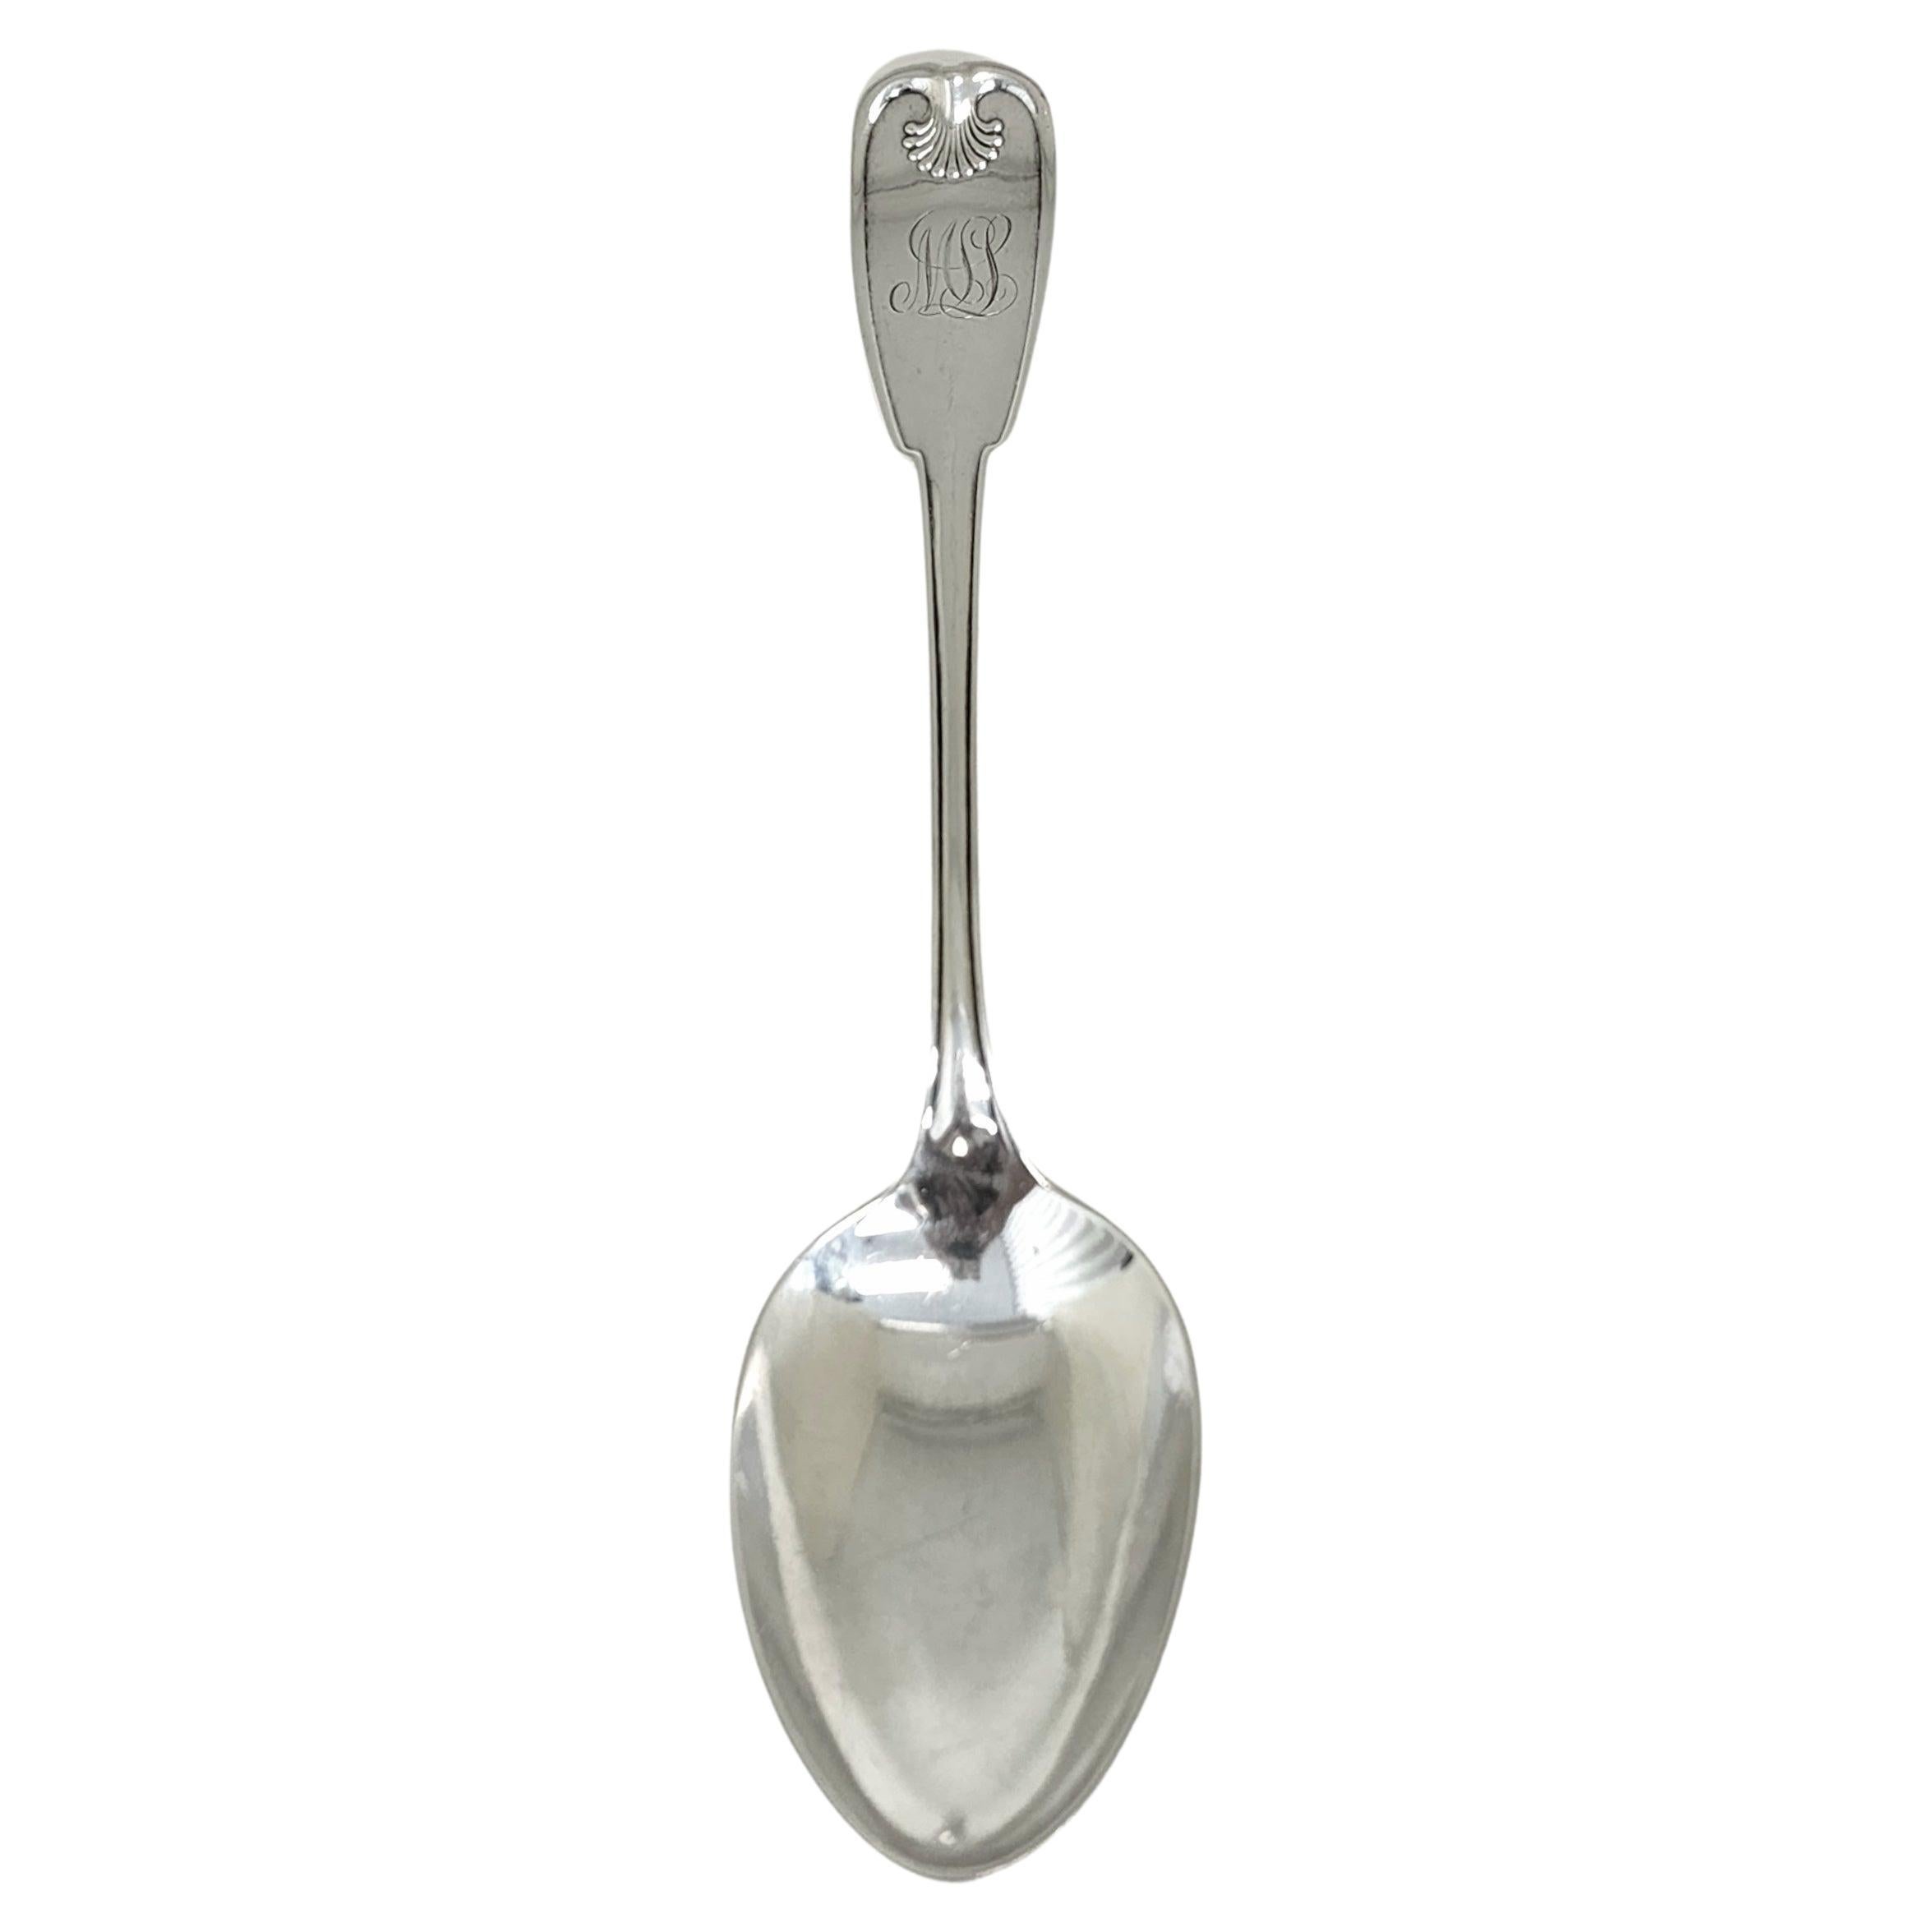 Tiffany & Co Palm Sterling Silver Tablespoon/Serving Spoon with Monogram #12568 For Sale